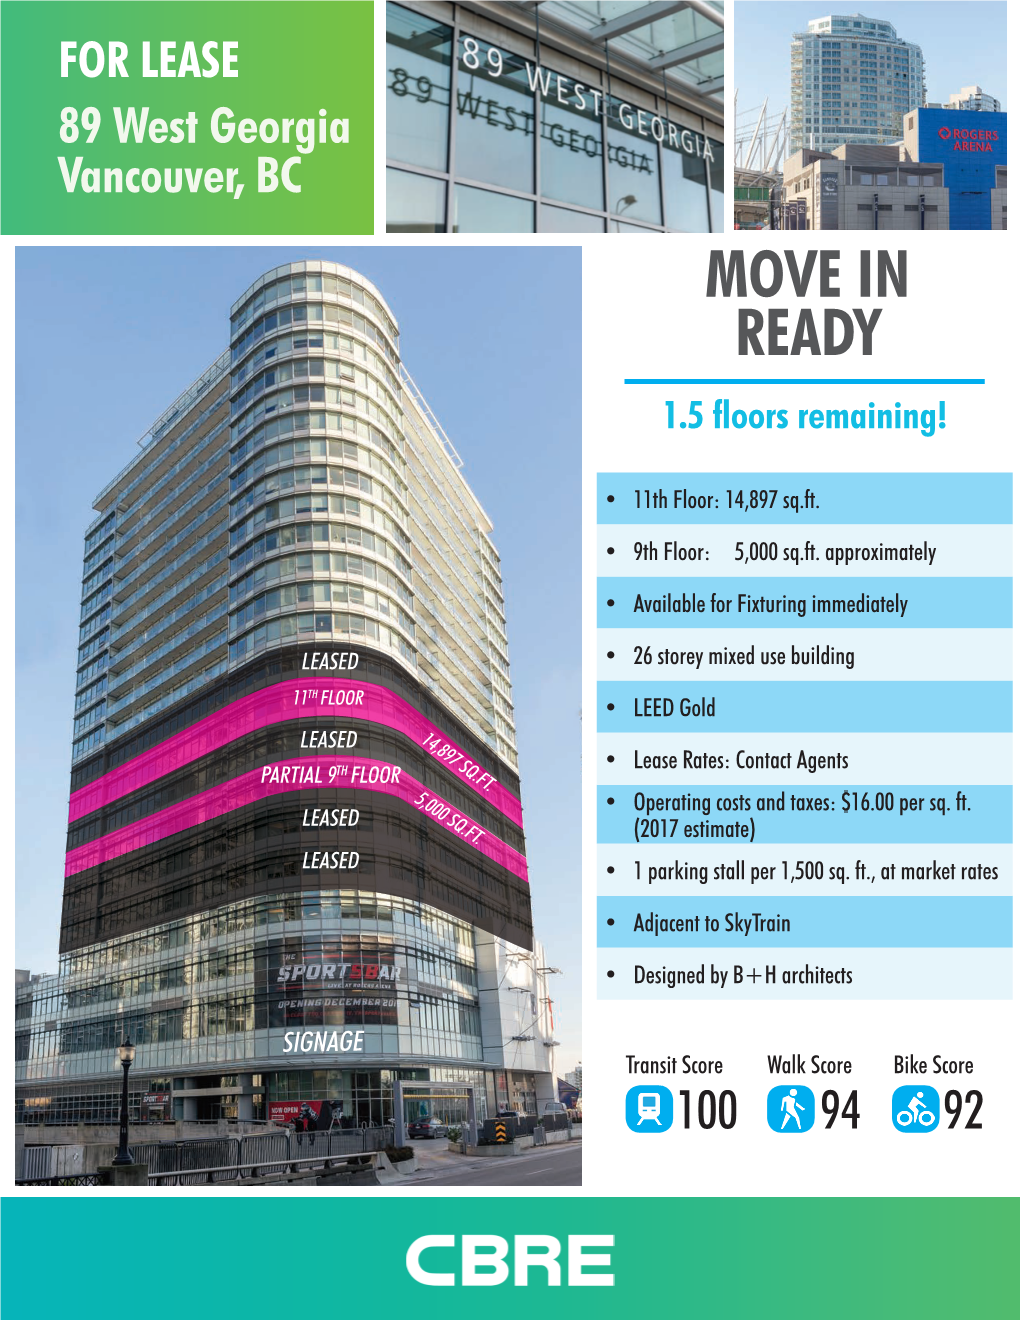 FOR LEASE 89 West Georgia Vancouver, BC MOVE in READY 1.5 Floors Remaining!